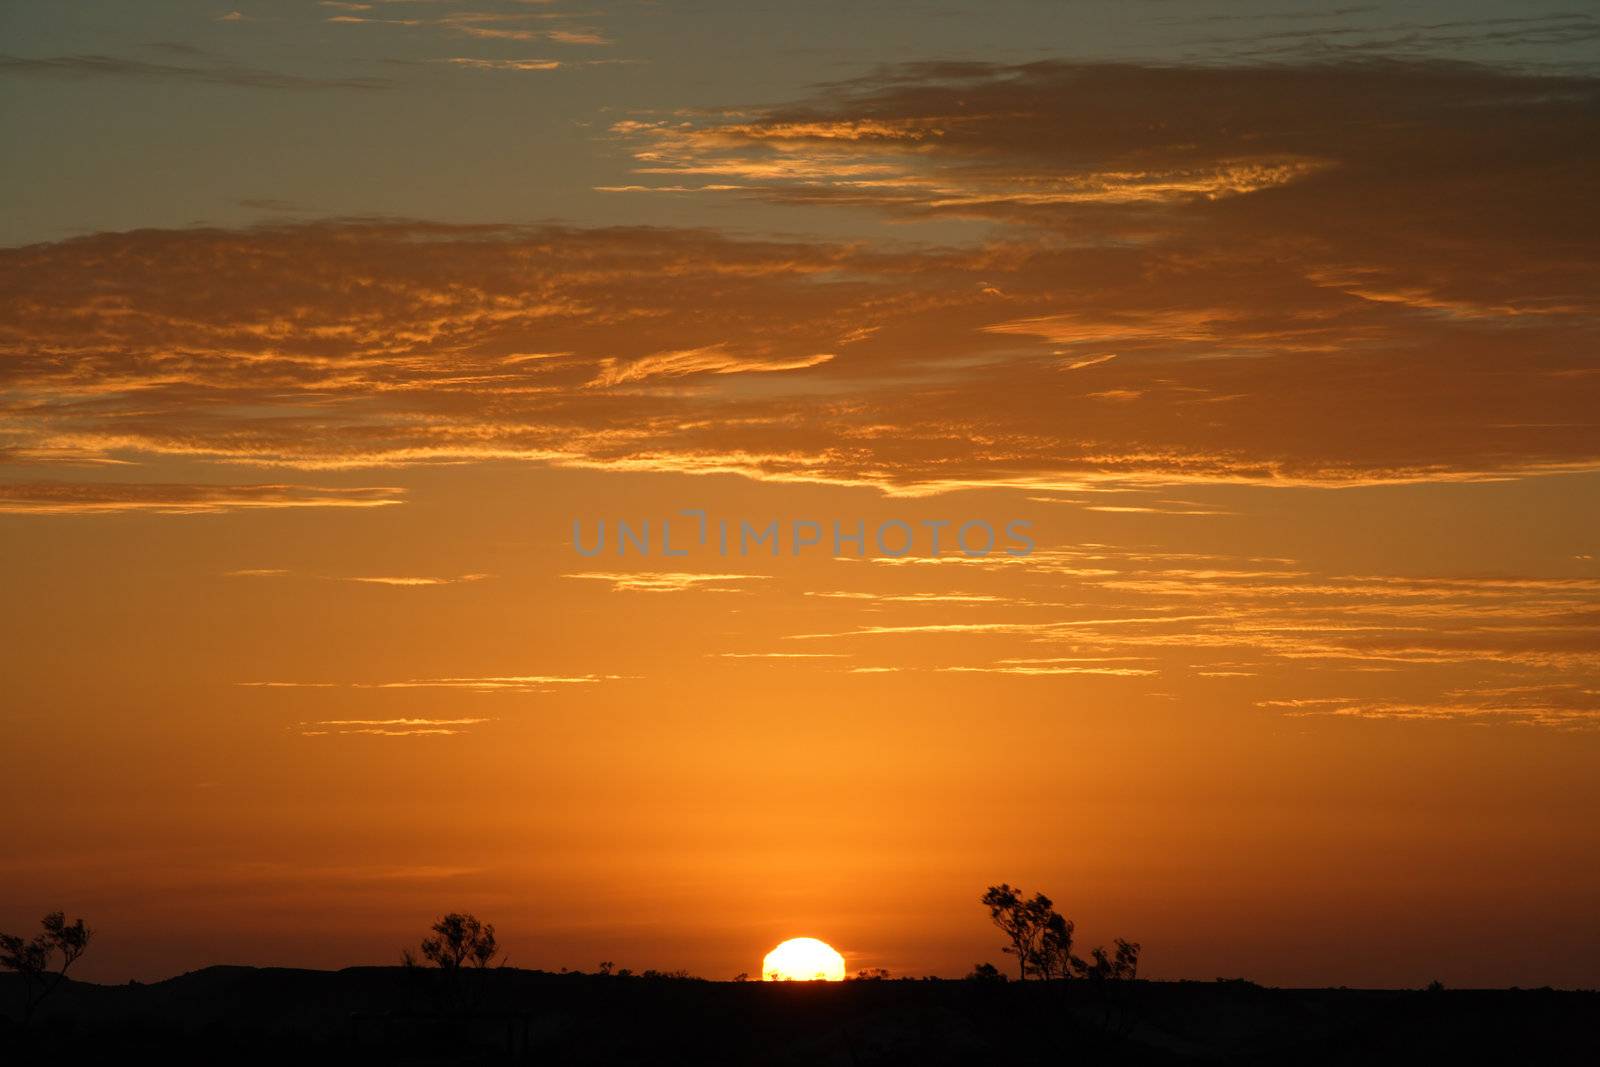 Australian outback sunset by sumners